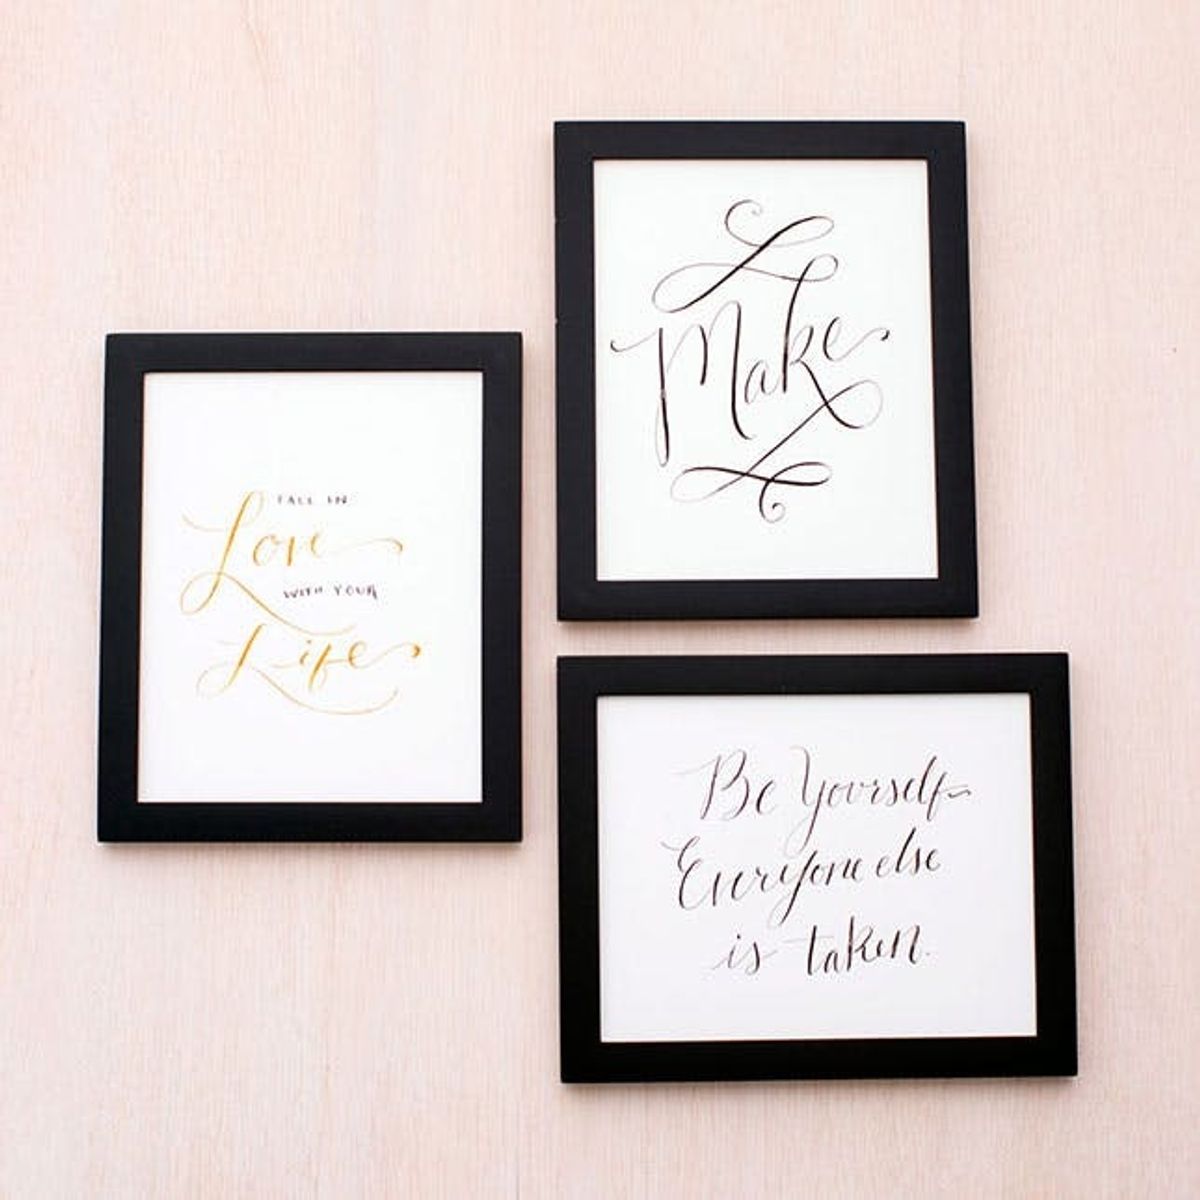 10 DIY Calligraphy Projects to Get Your Hobby Started